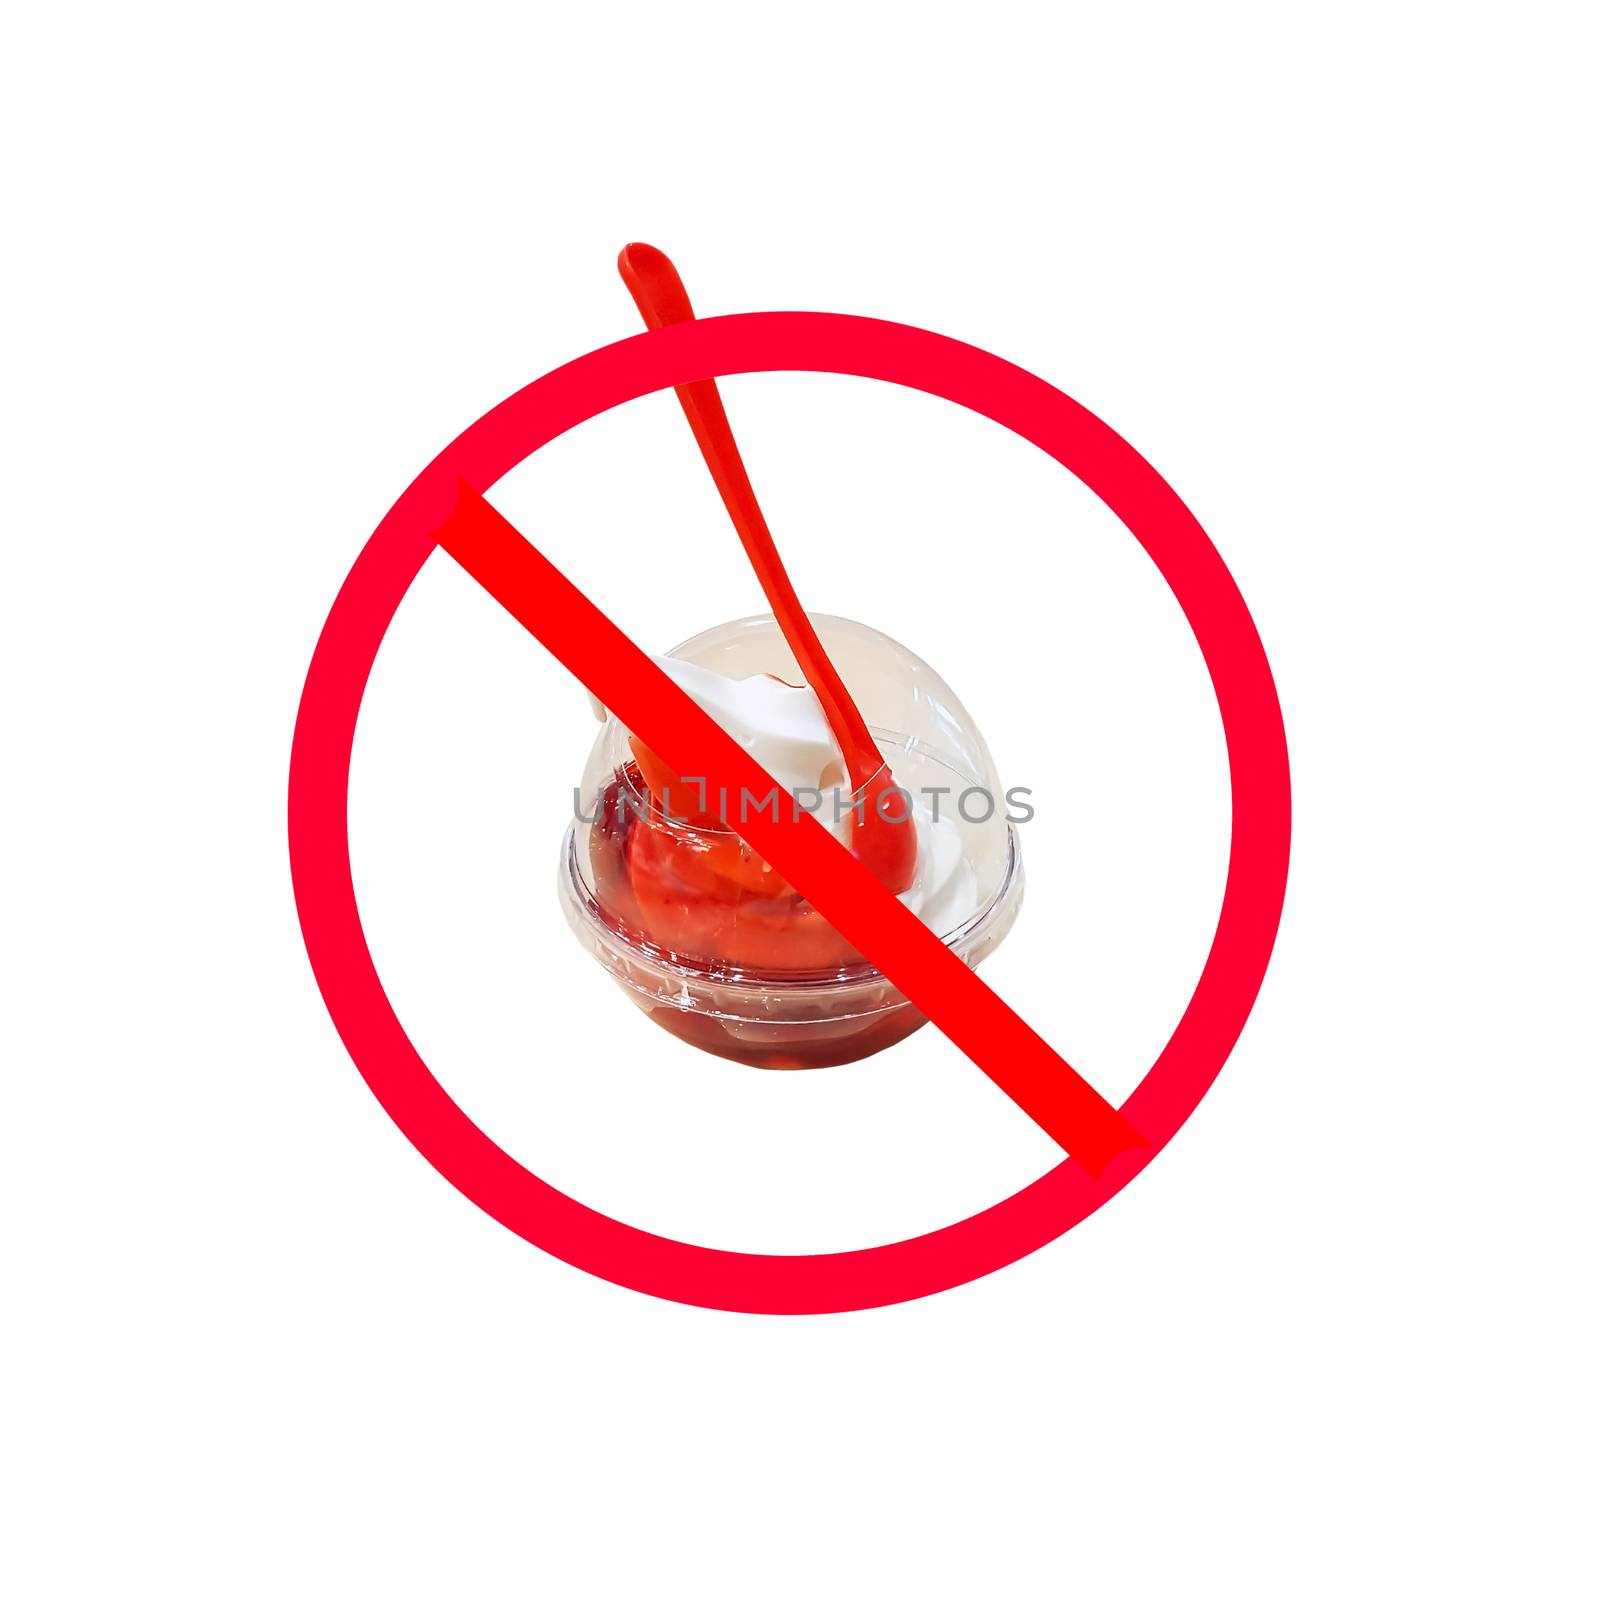 The red circle with slash on ice cream isolated on white background ; Concept for food and sugar dieting to lose weight.